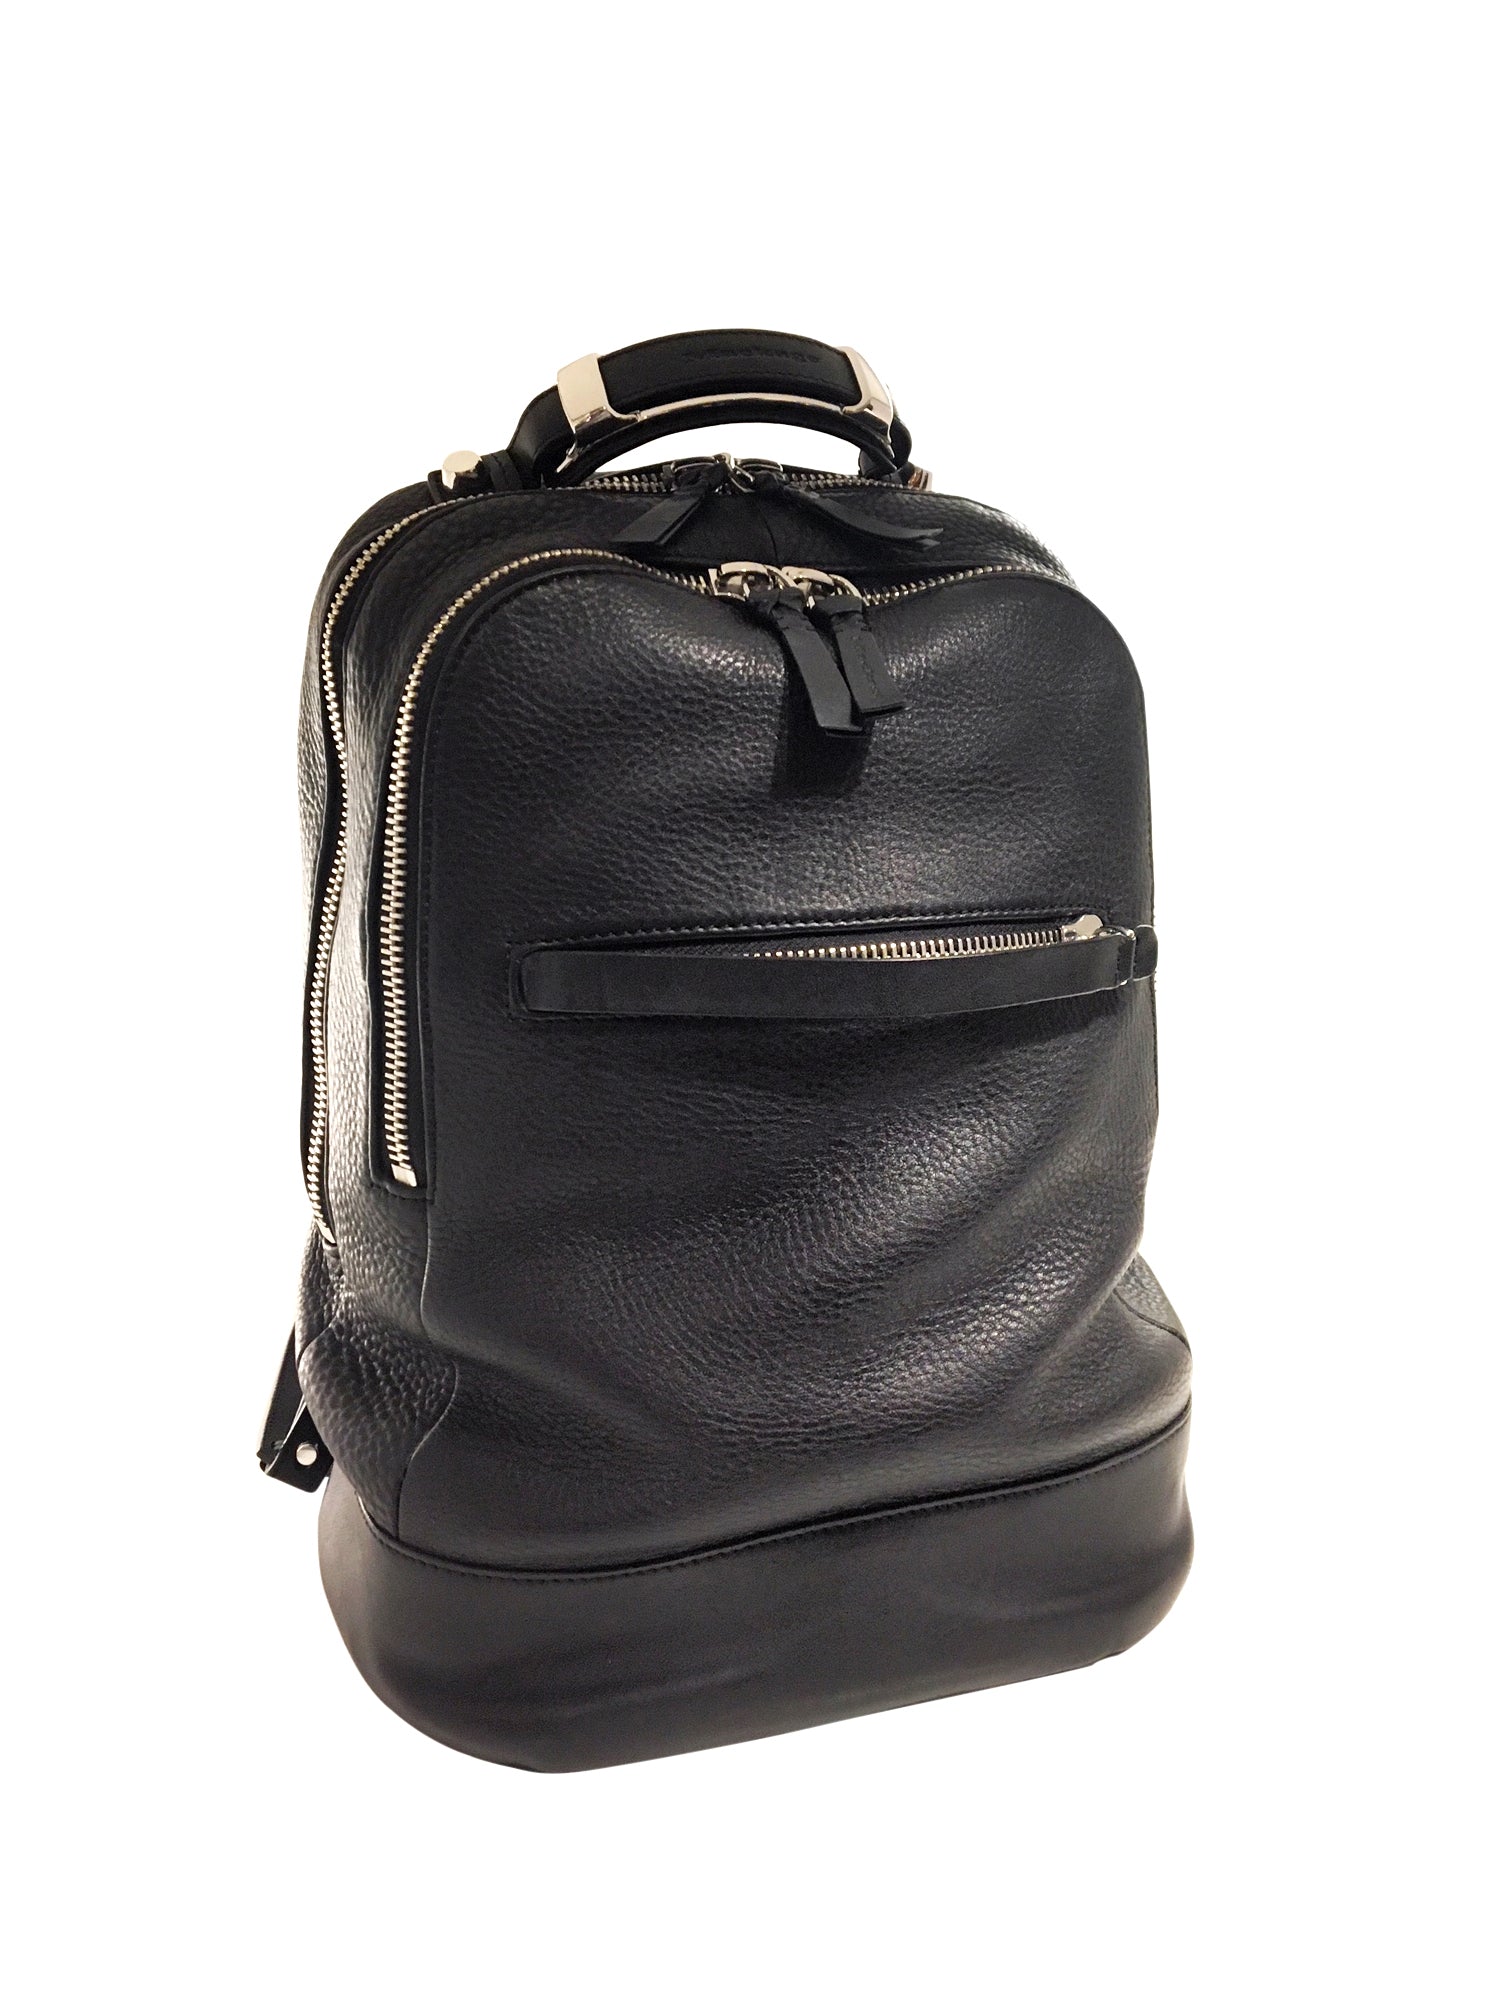 Mackage Croydon Backpack Large - aptiques by Authentic PreOwned